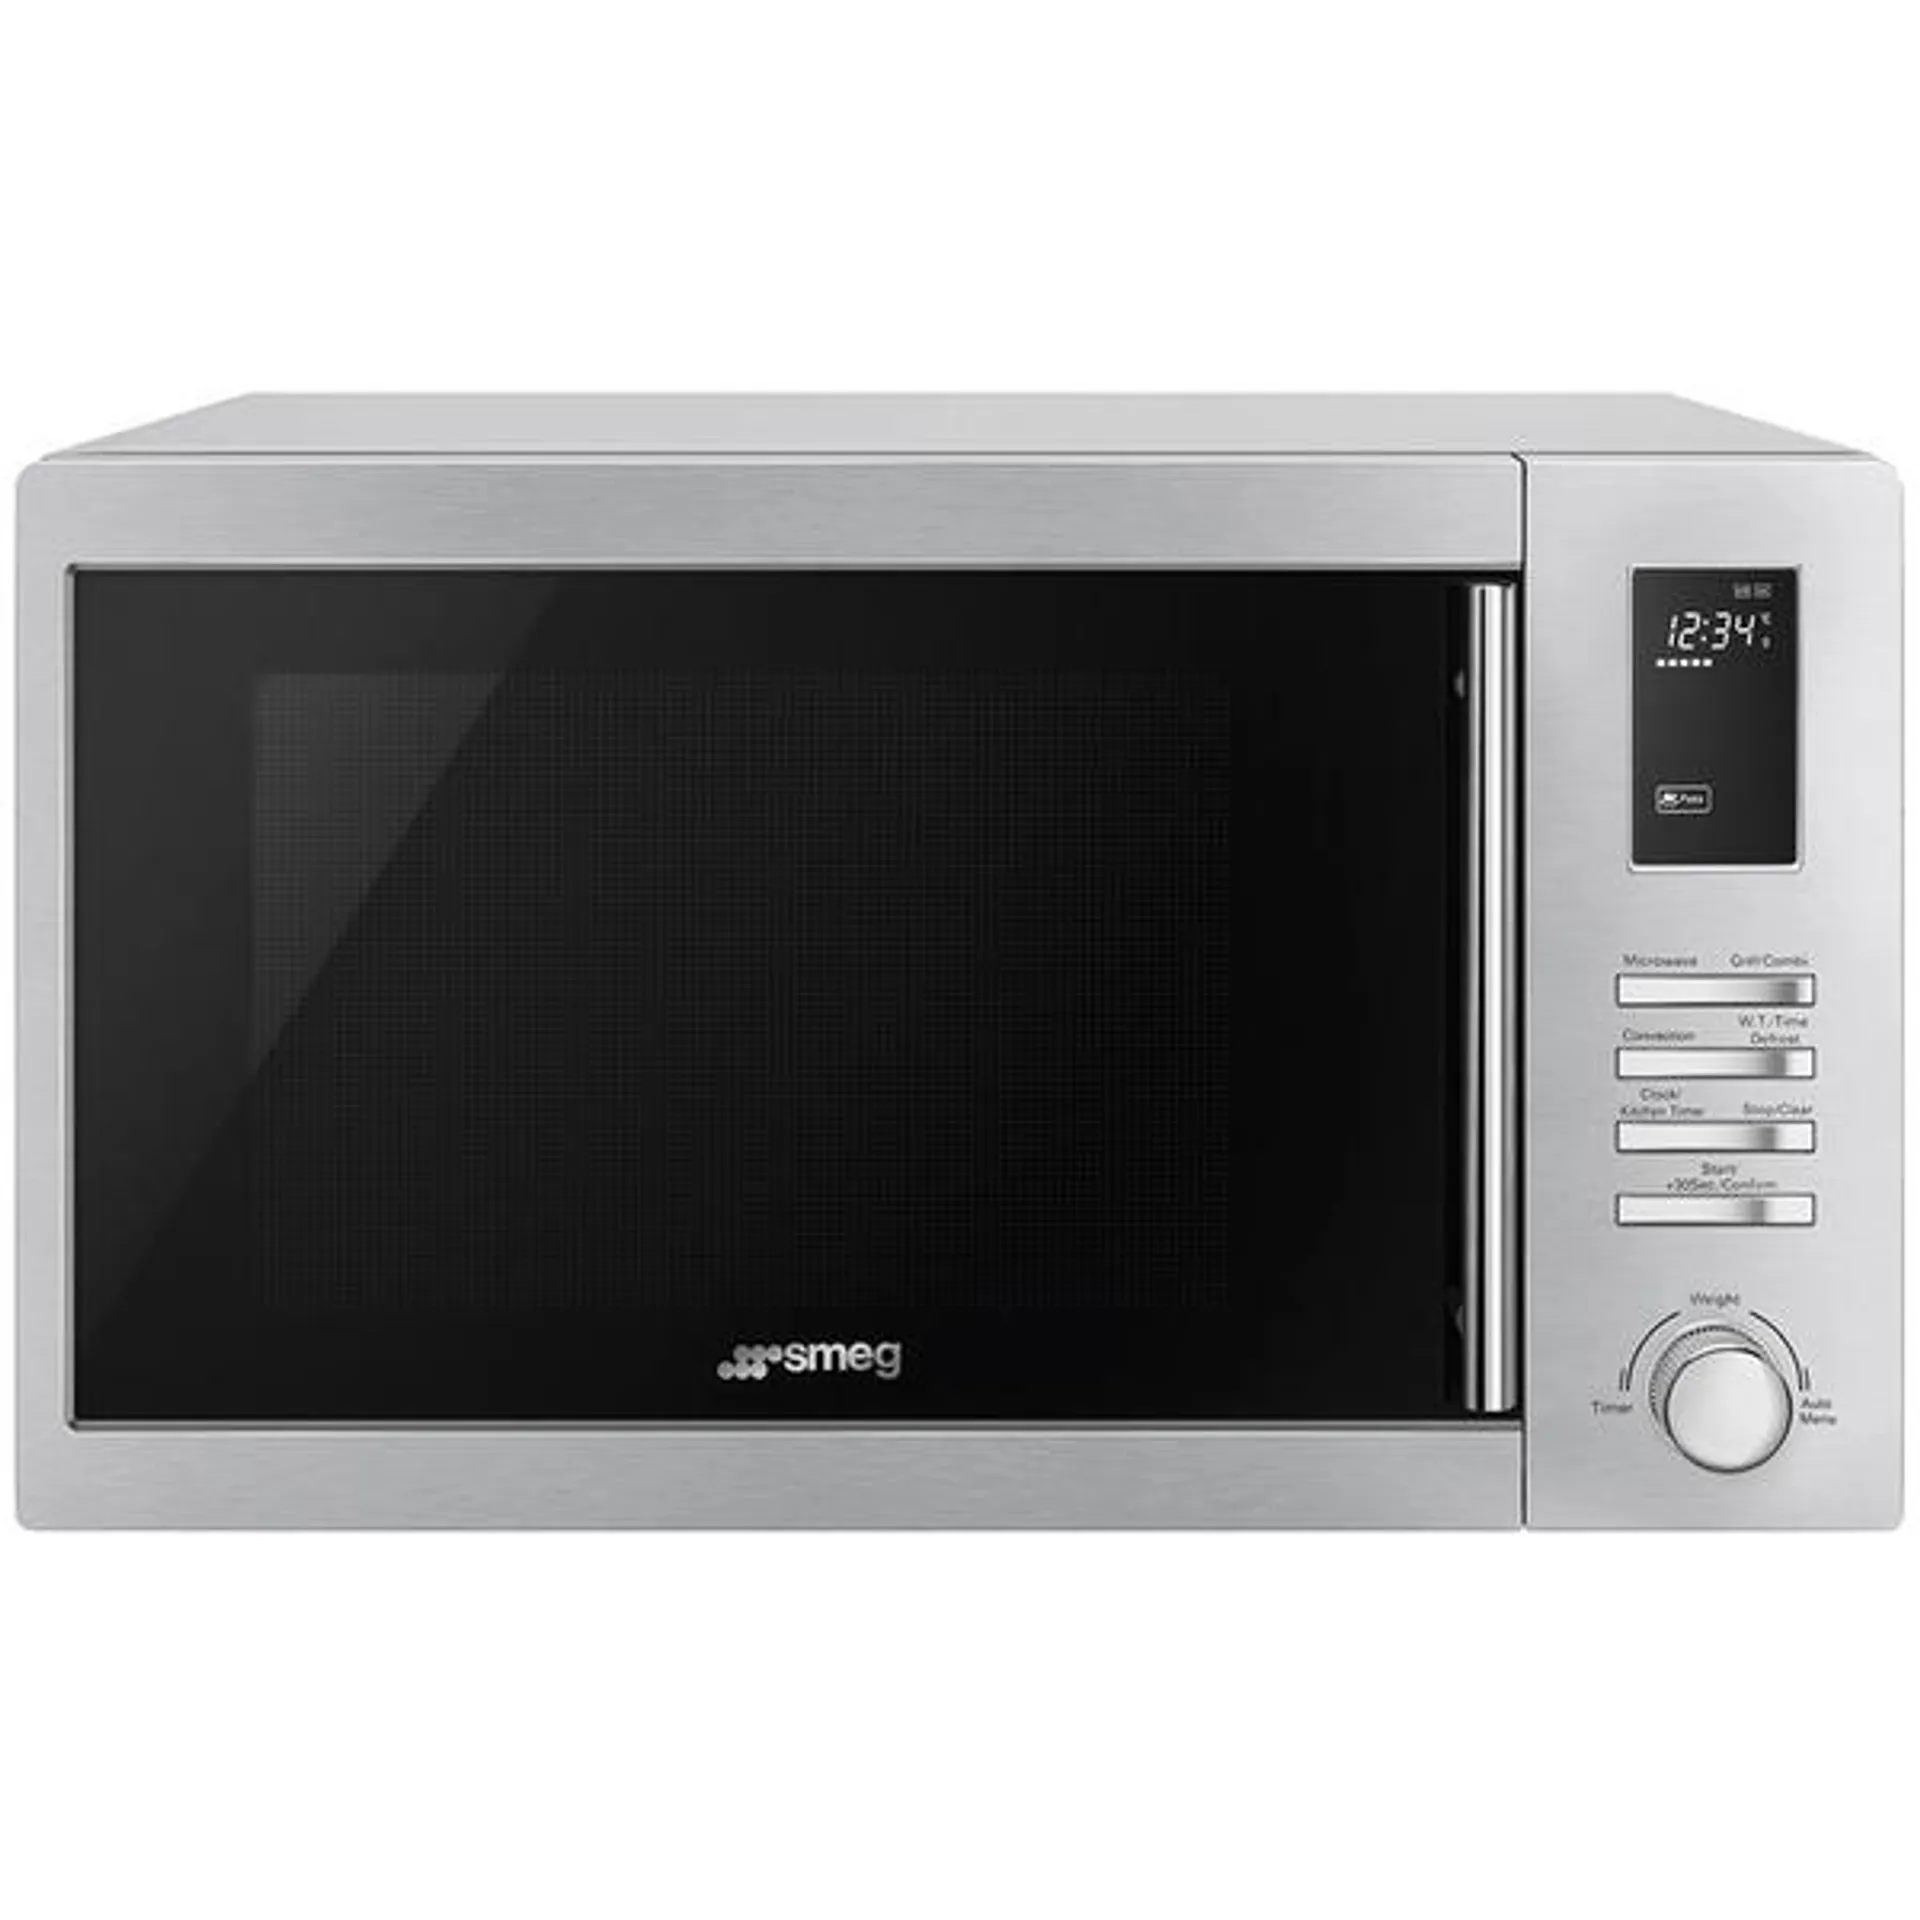 Smeg 34L 1000W Microwave Oven with Grill SA34MX